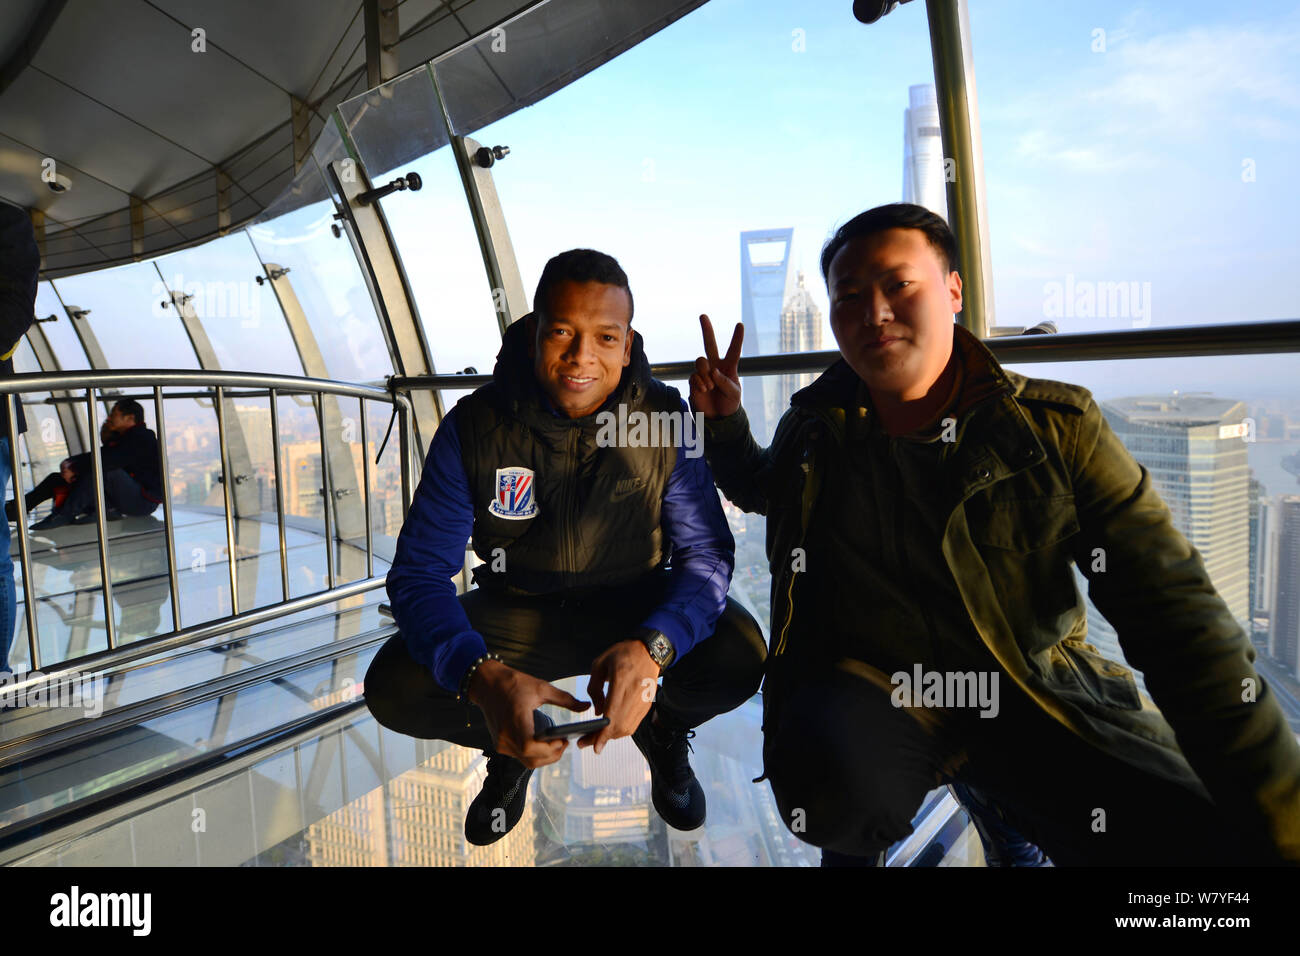 Colombian football player Fredy Guarin of Shanghai Greenland Shenhua F.C., left, attends a ceremony for Shanghai Greenland Shenhua F.C. to prepare for Stock Photo